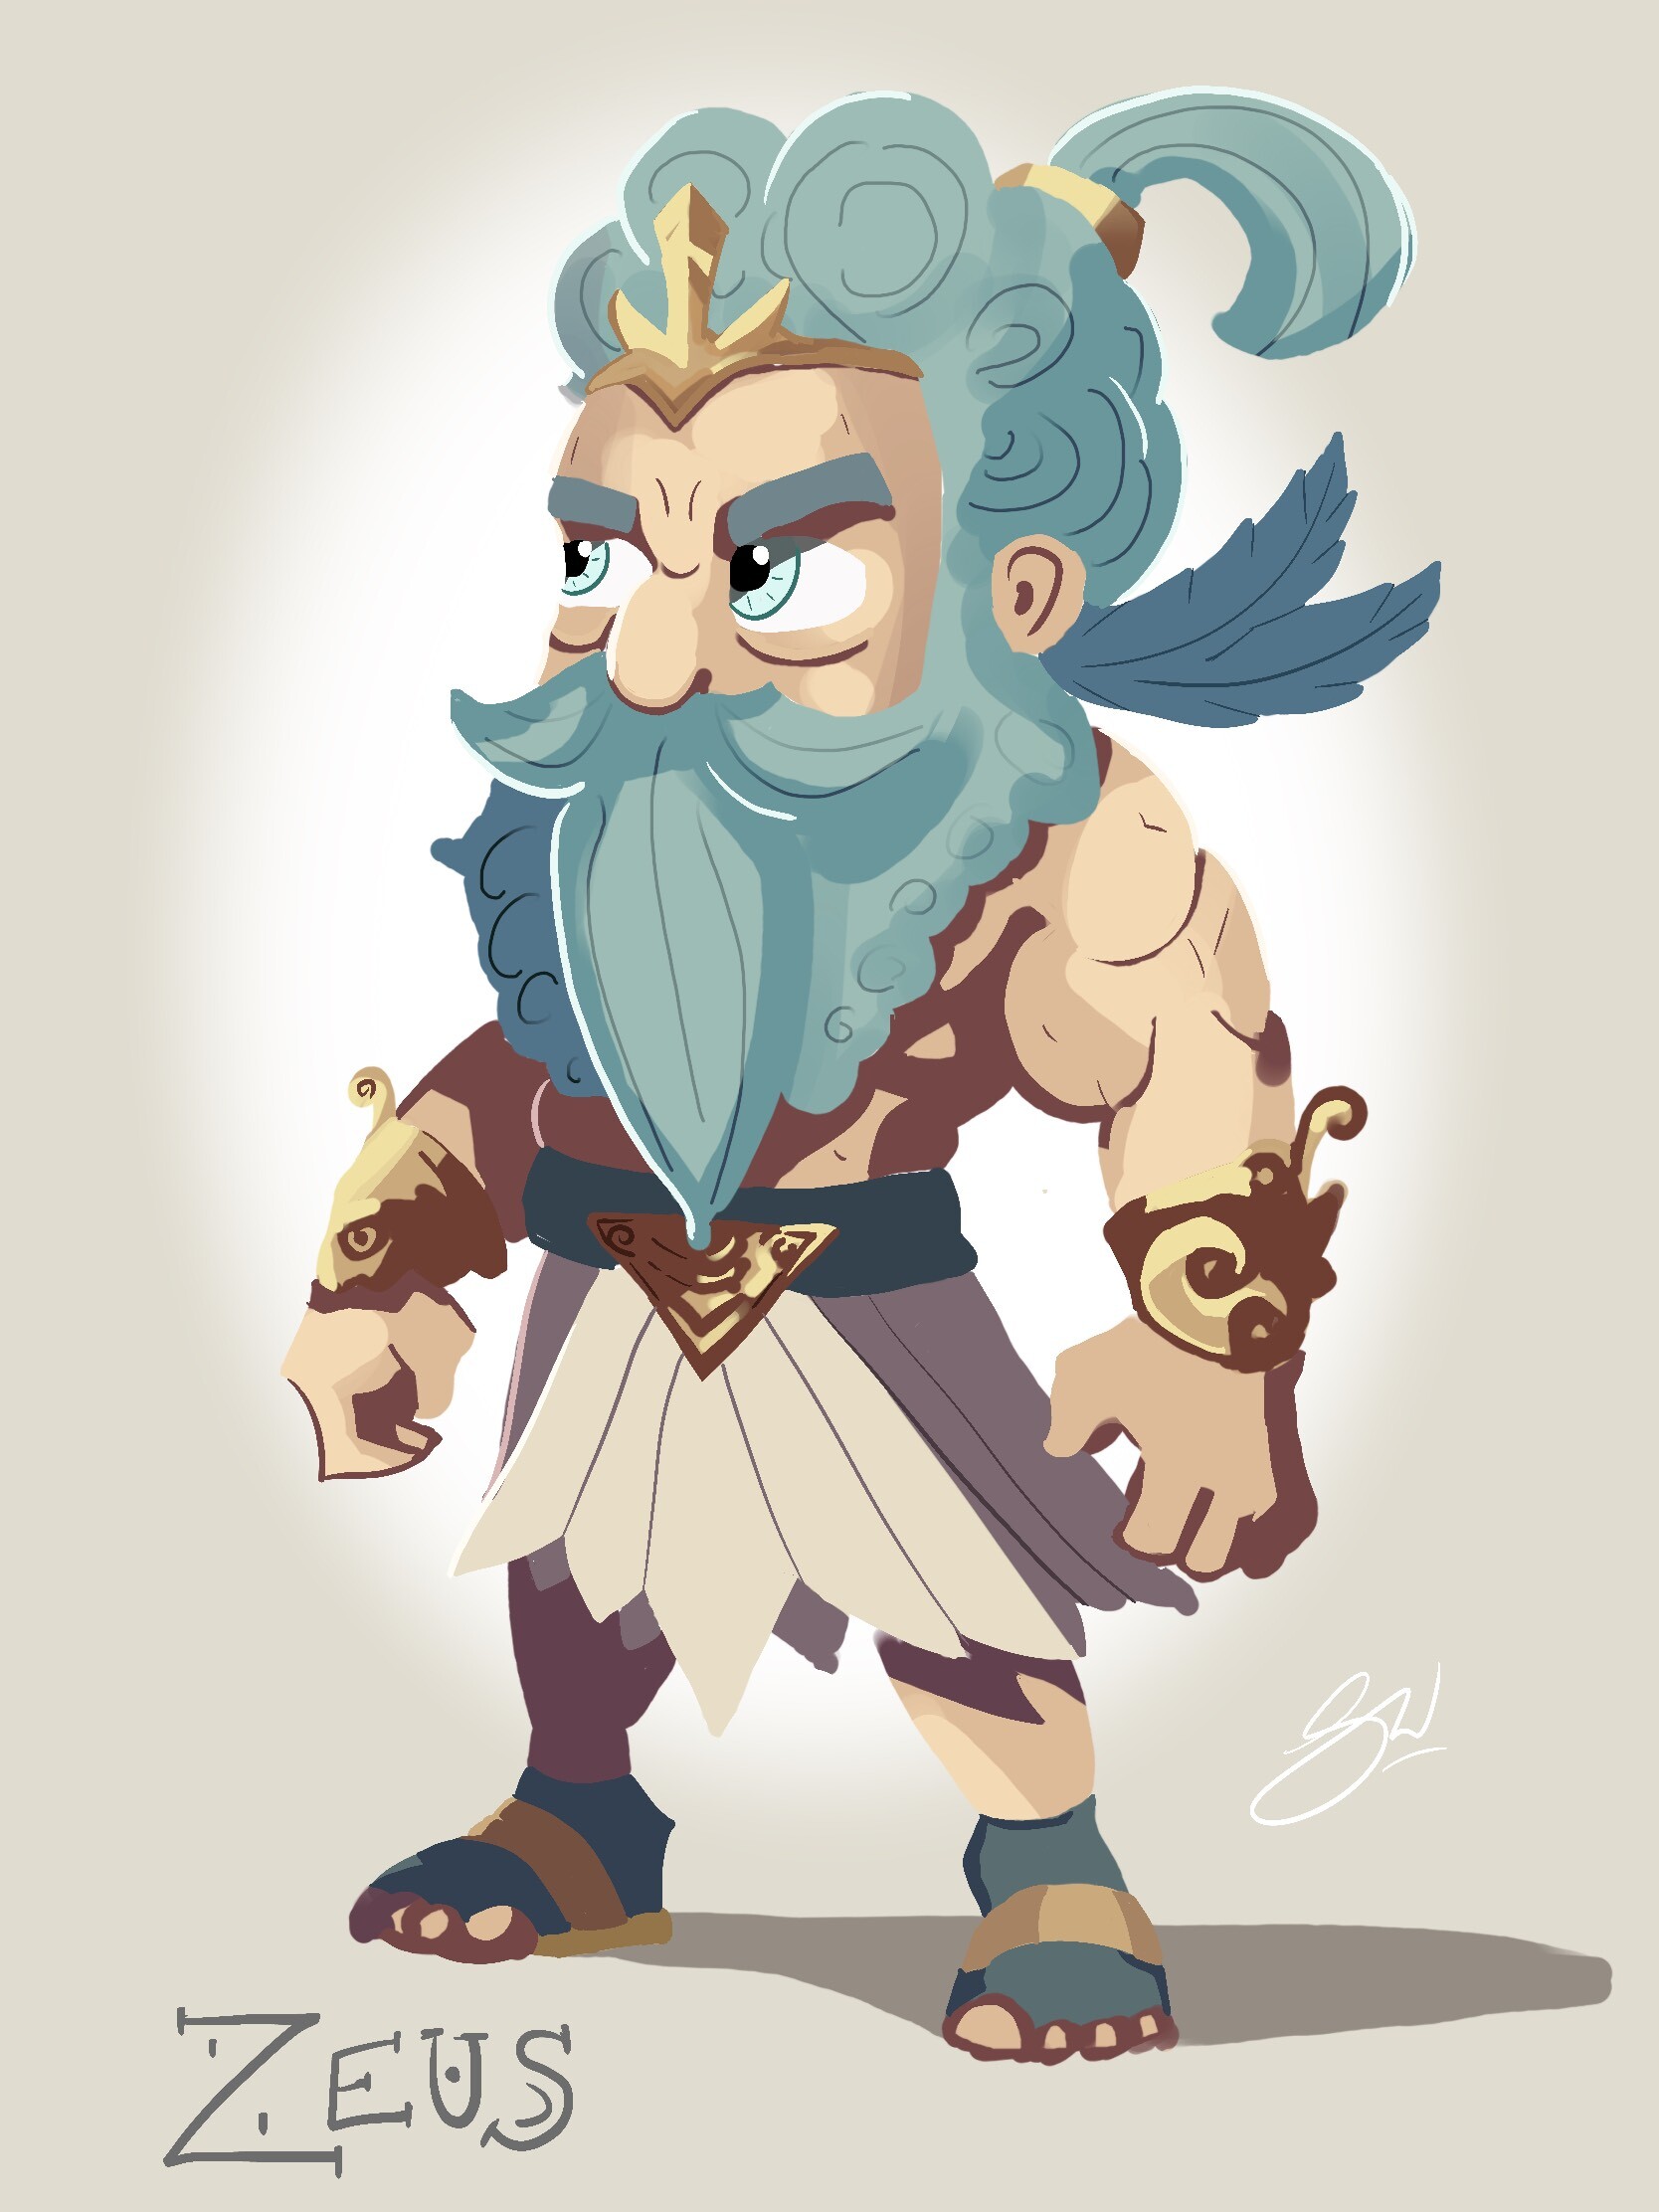 DP1350 - Games character design, the God of battle with zeus head